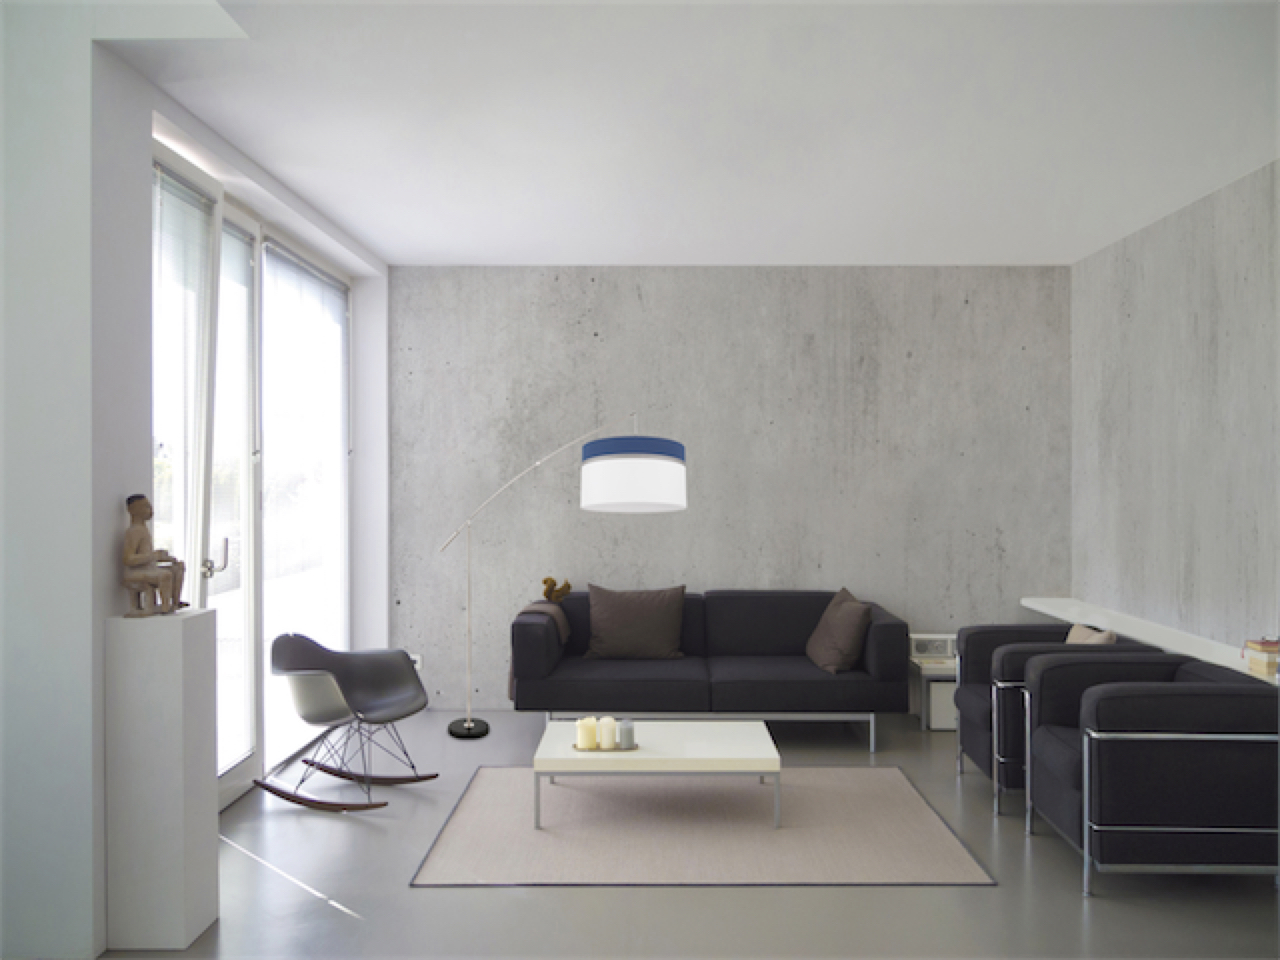 Floor lamp NADINA 1 39368A in a living room with concrete walls